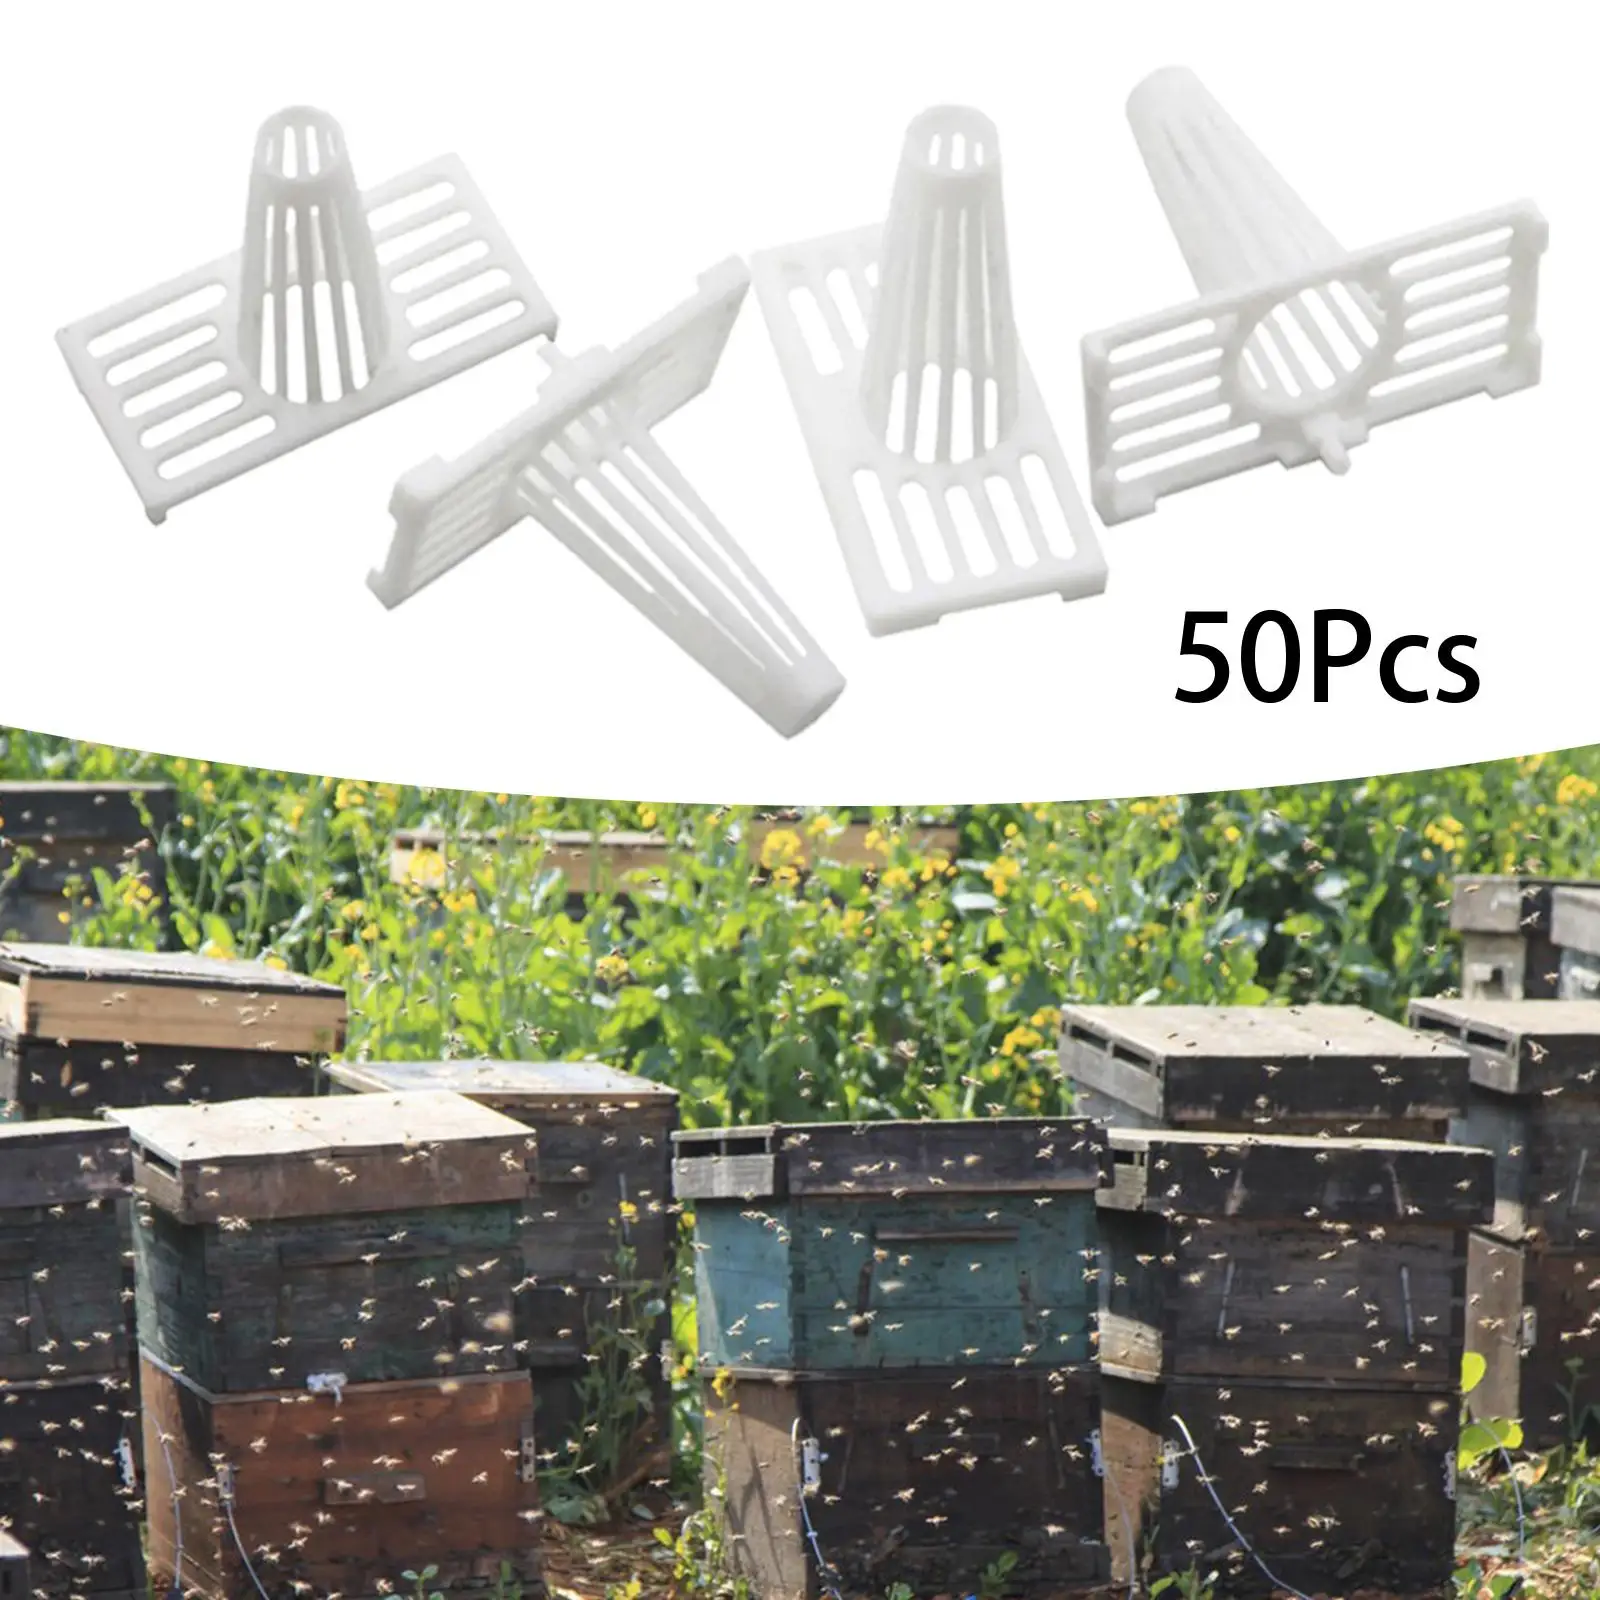 50 Pieces Bee Hive Frame Nest Gate Apiculture Bee Tool for Outdoor Workshop